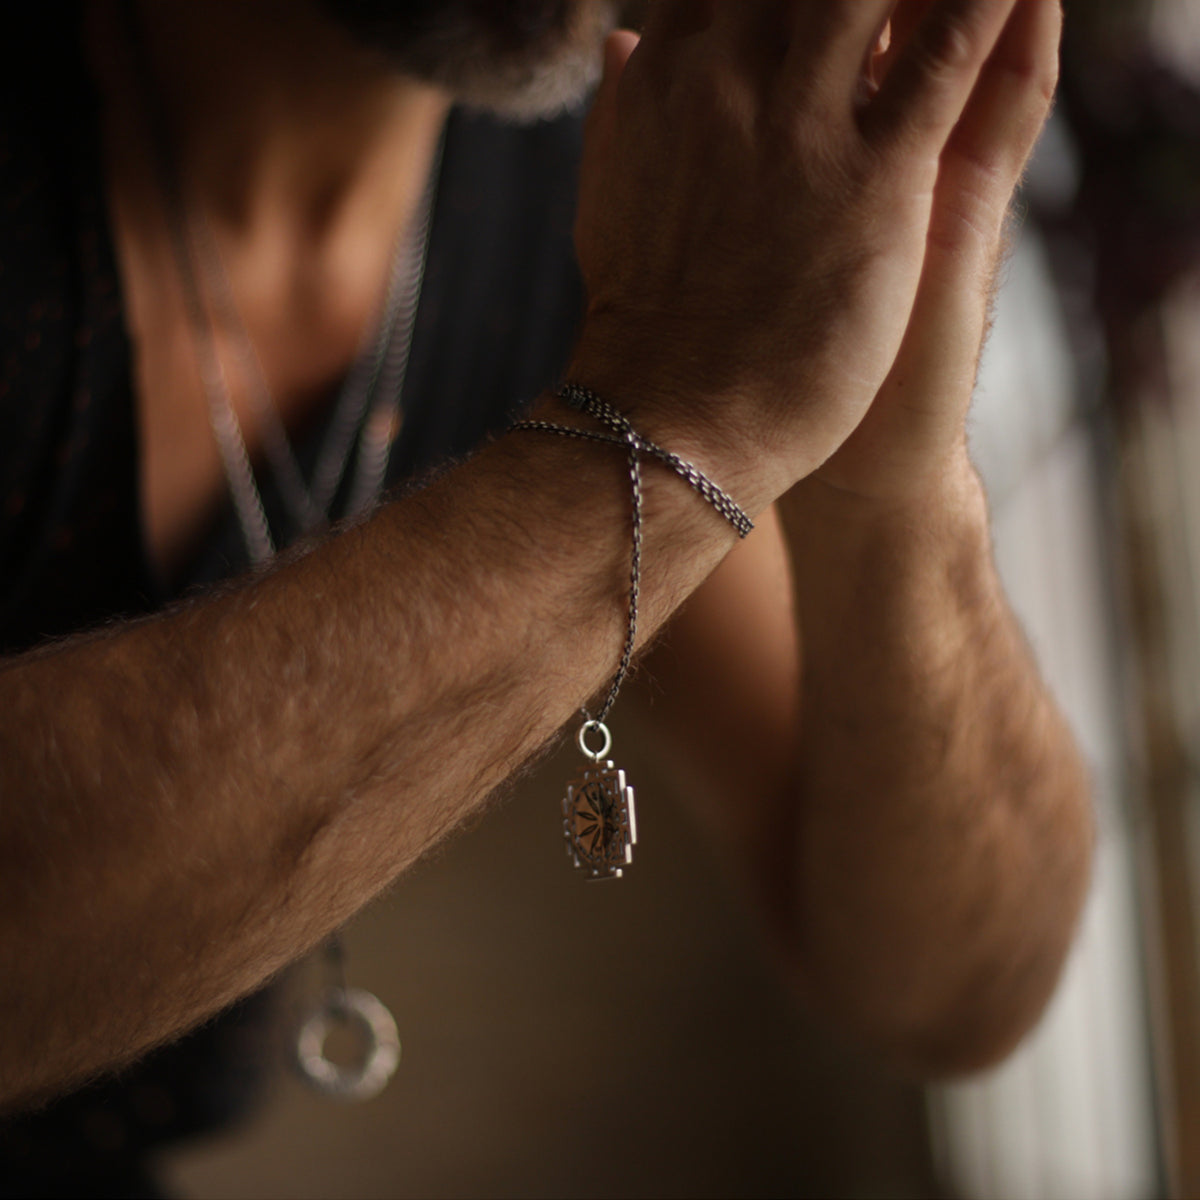 Spiritual jewellery for men made of Sterling silver by ETERNAL BLISS